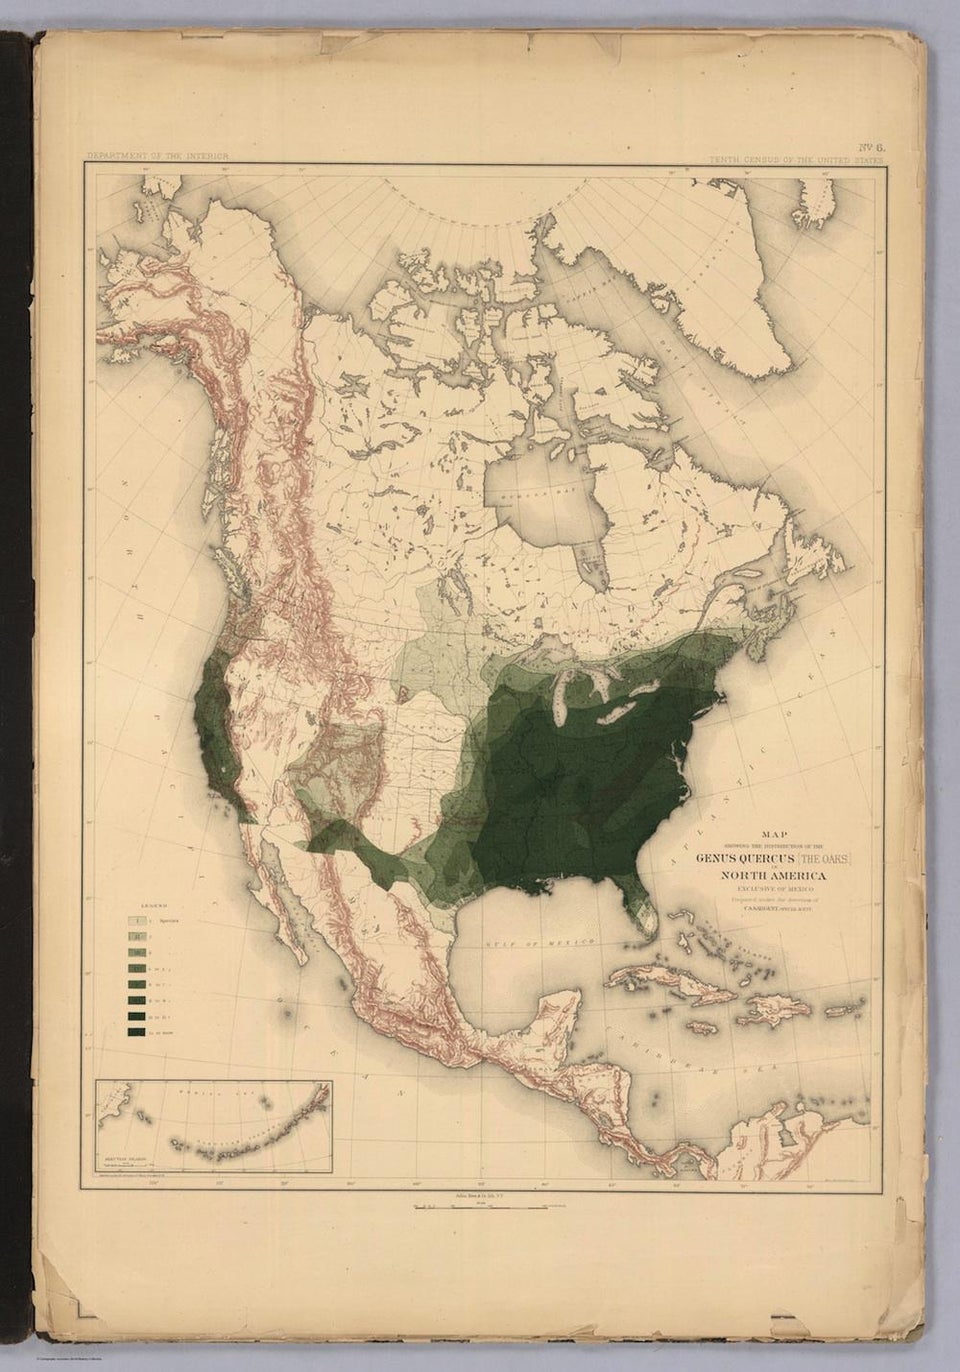 History of American Forests: Tree maps made for 1884 census.